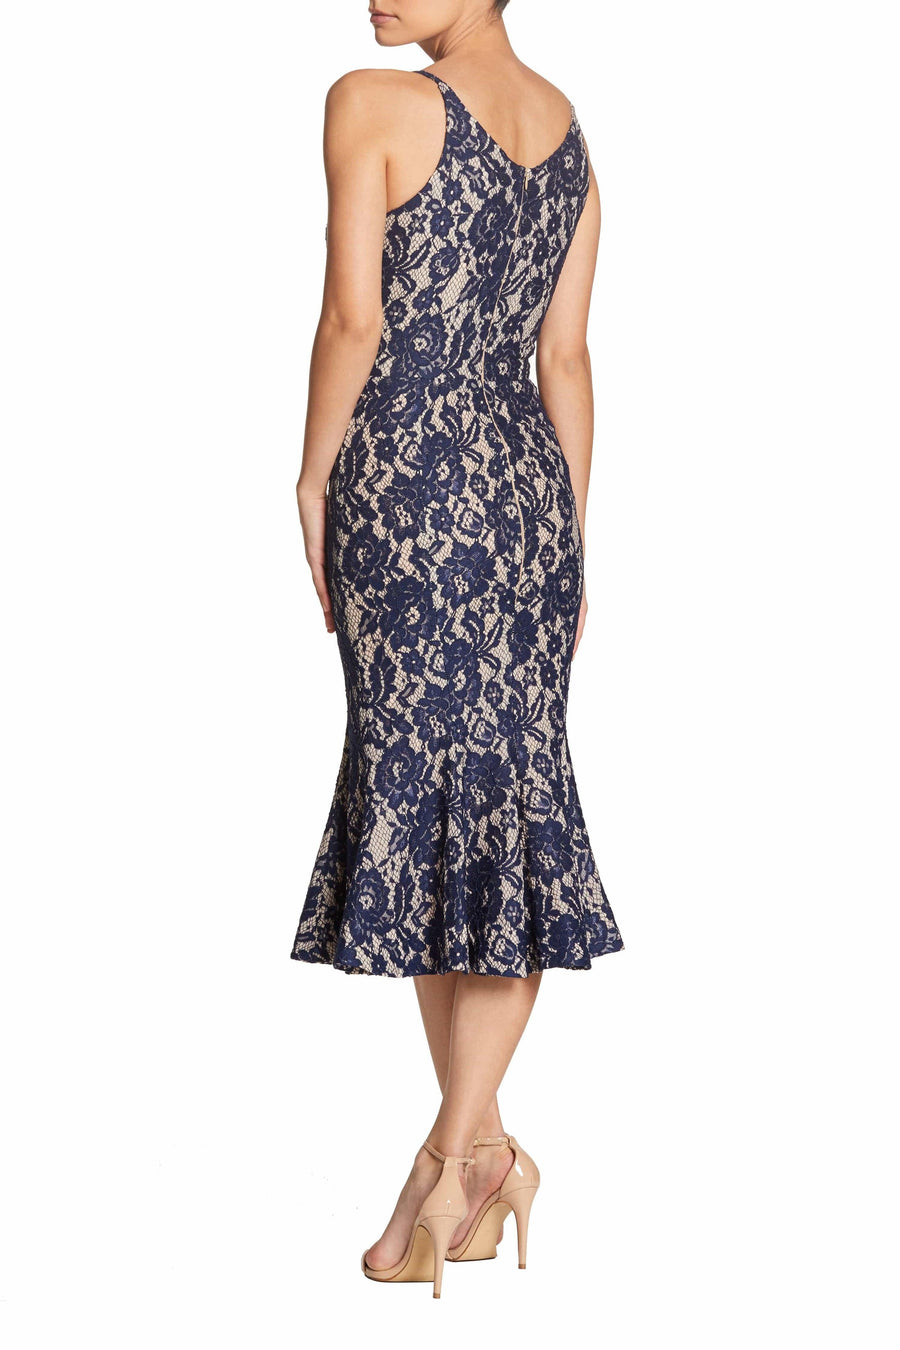 Isabelle Dress / NAVY/NUDE